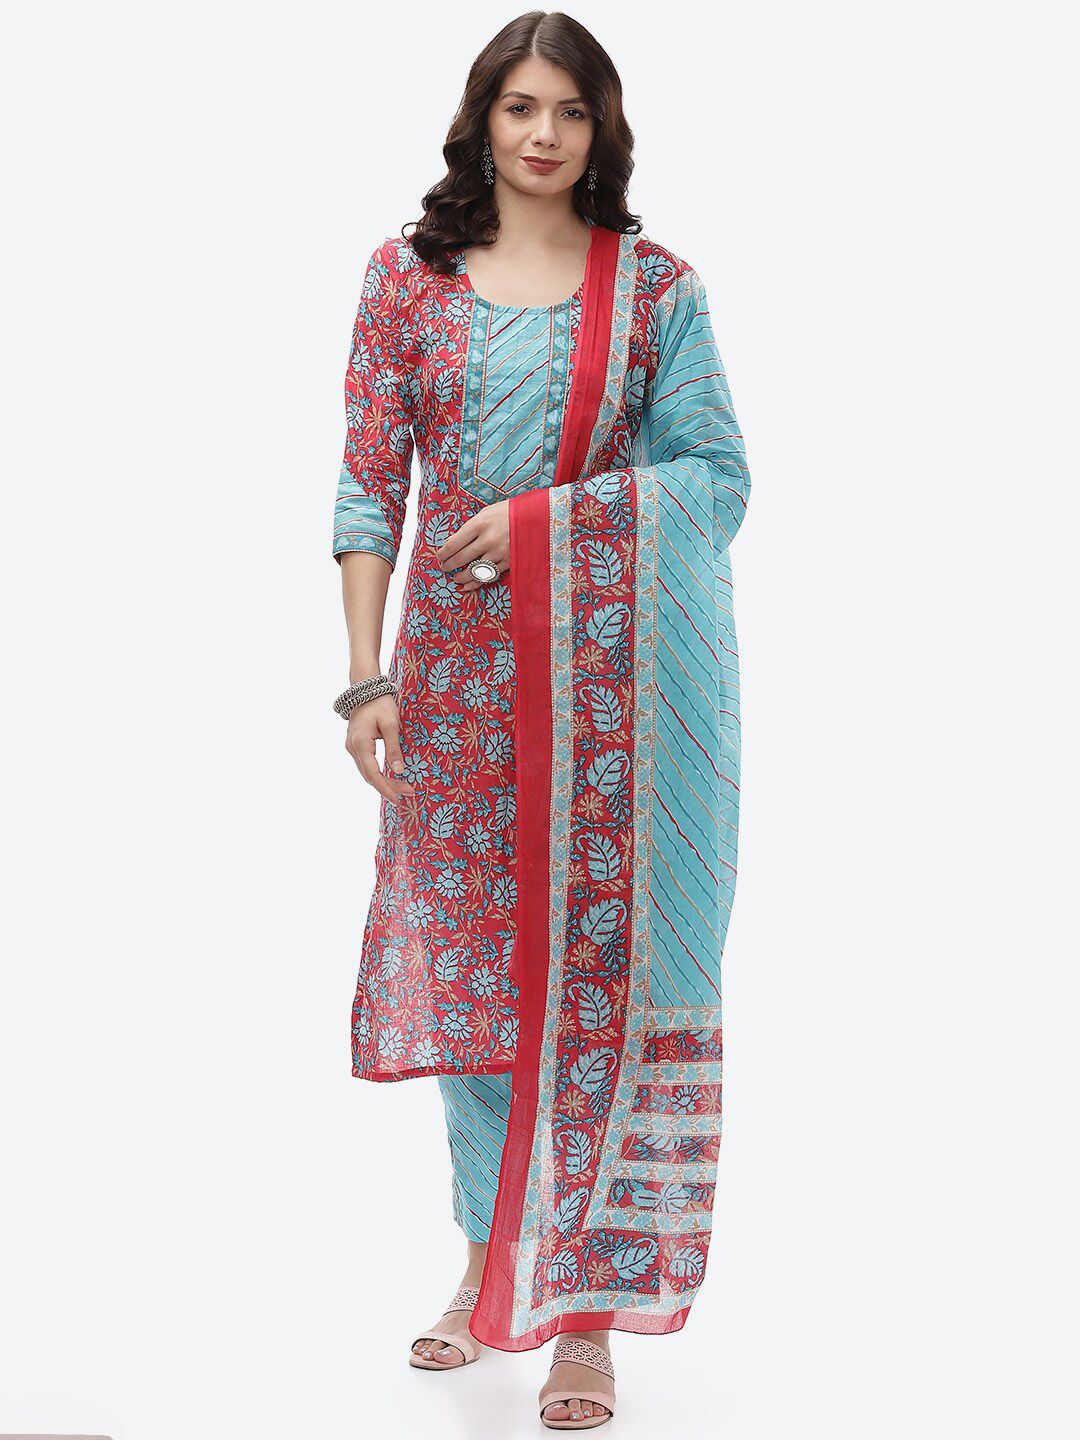 Biba Pink & Blue Unstitched Dress Material Price in India